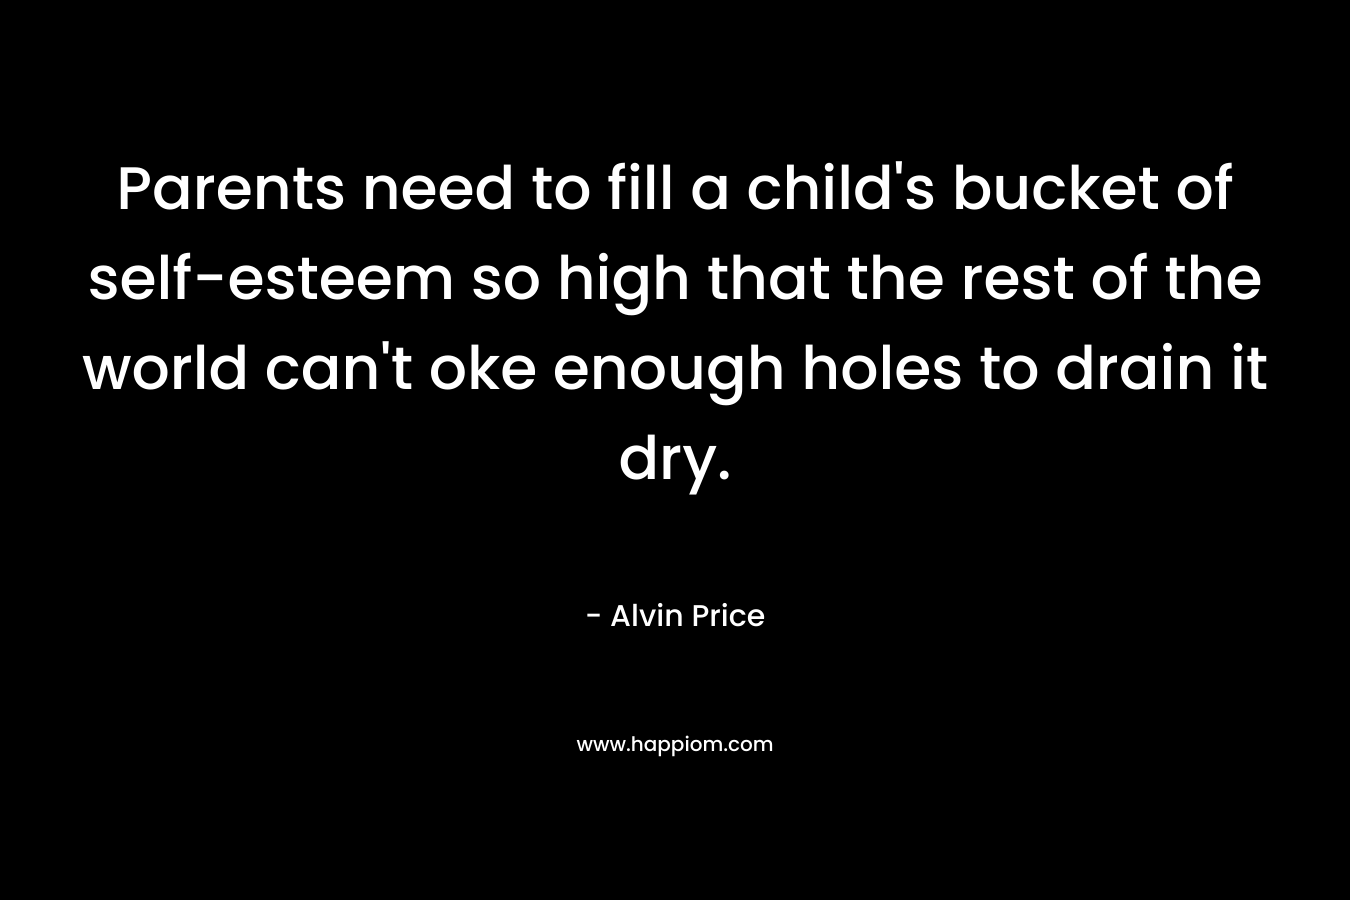 Parents need to fill a child’s bucket of self-esteem so high that the rest of the world can’t oke enough holes to drain it dry. – Alvin Price